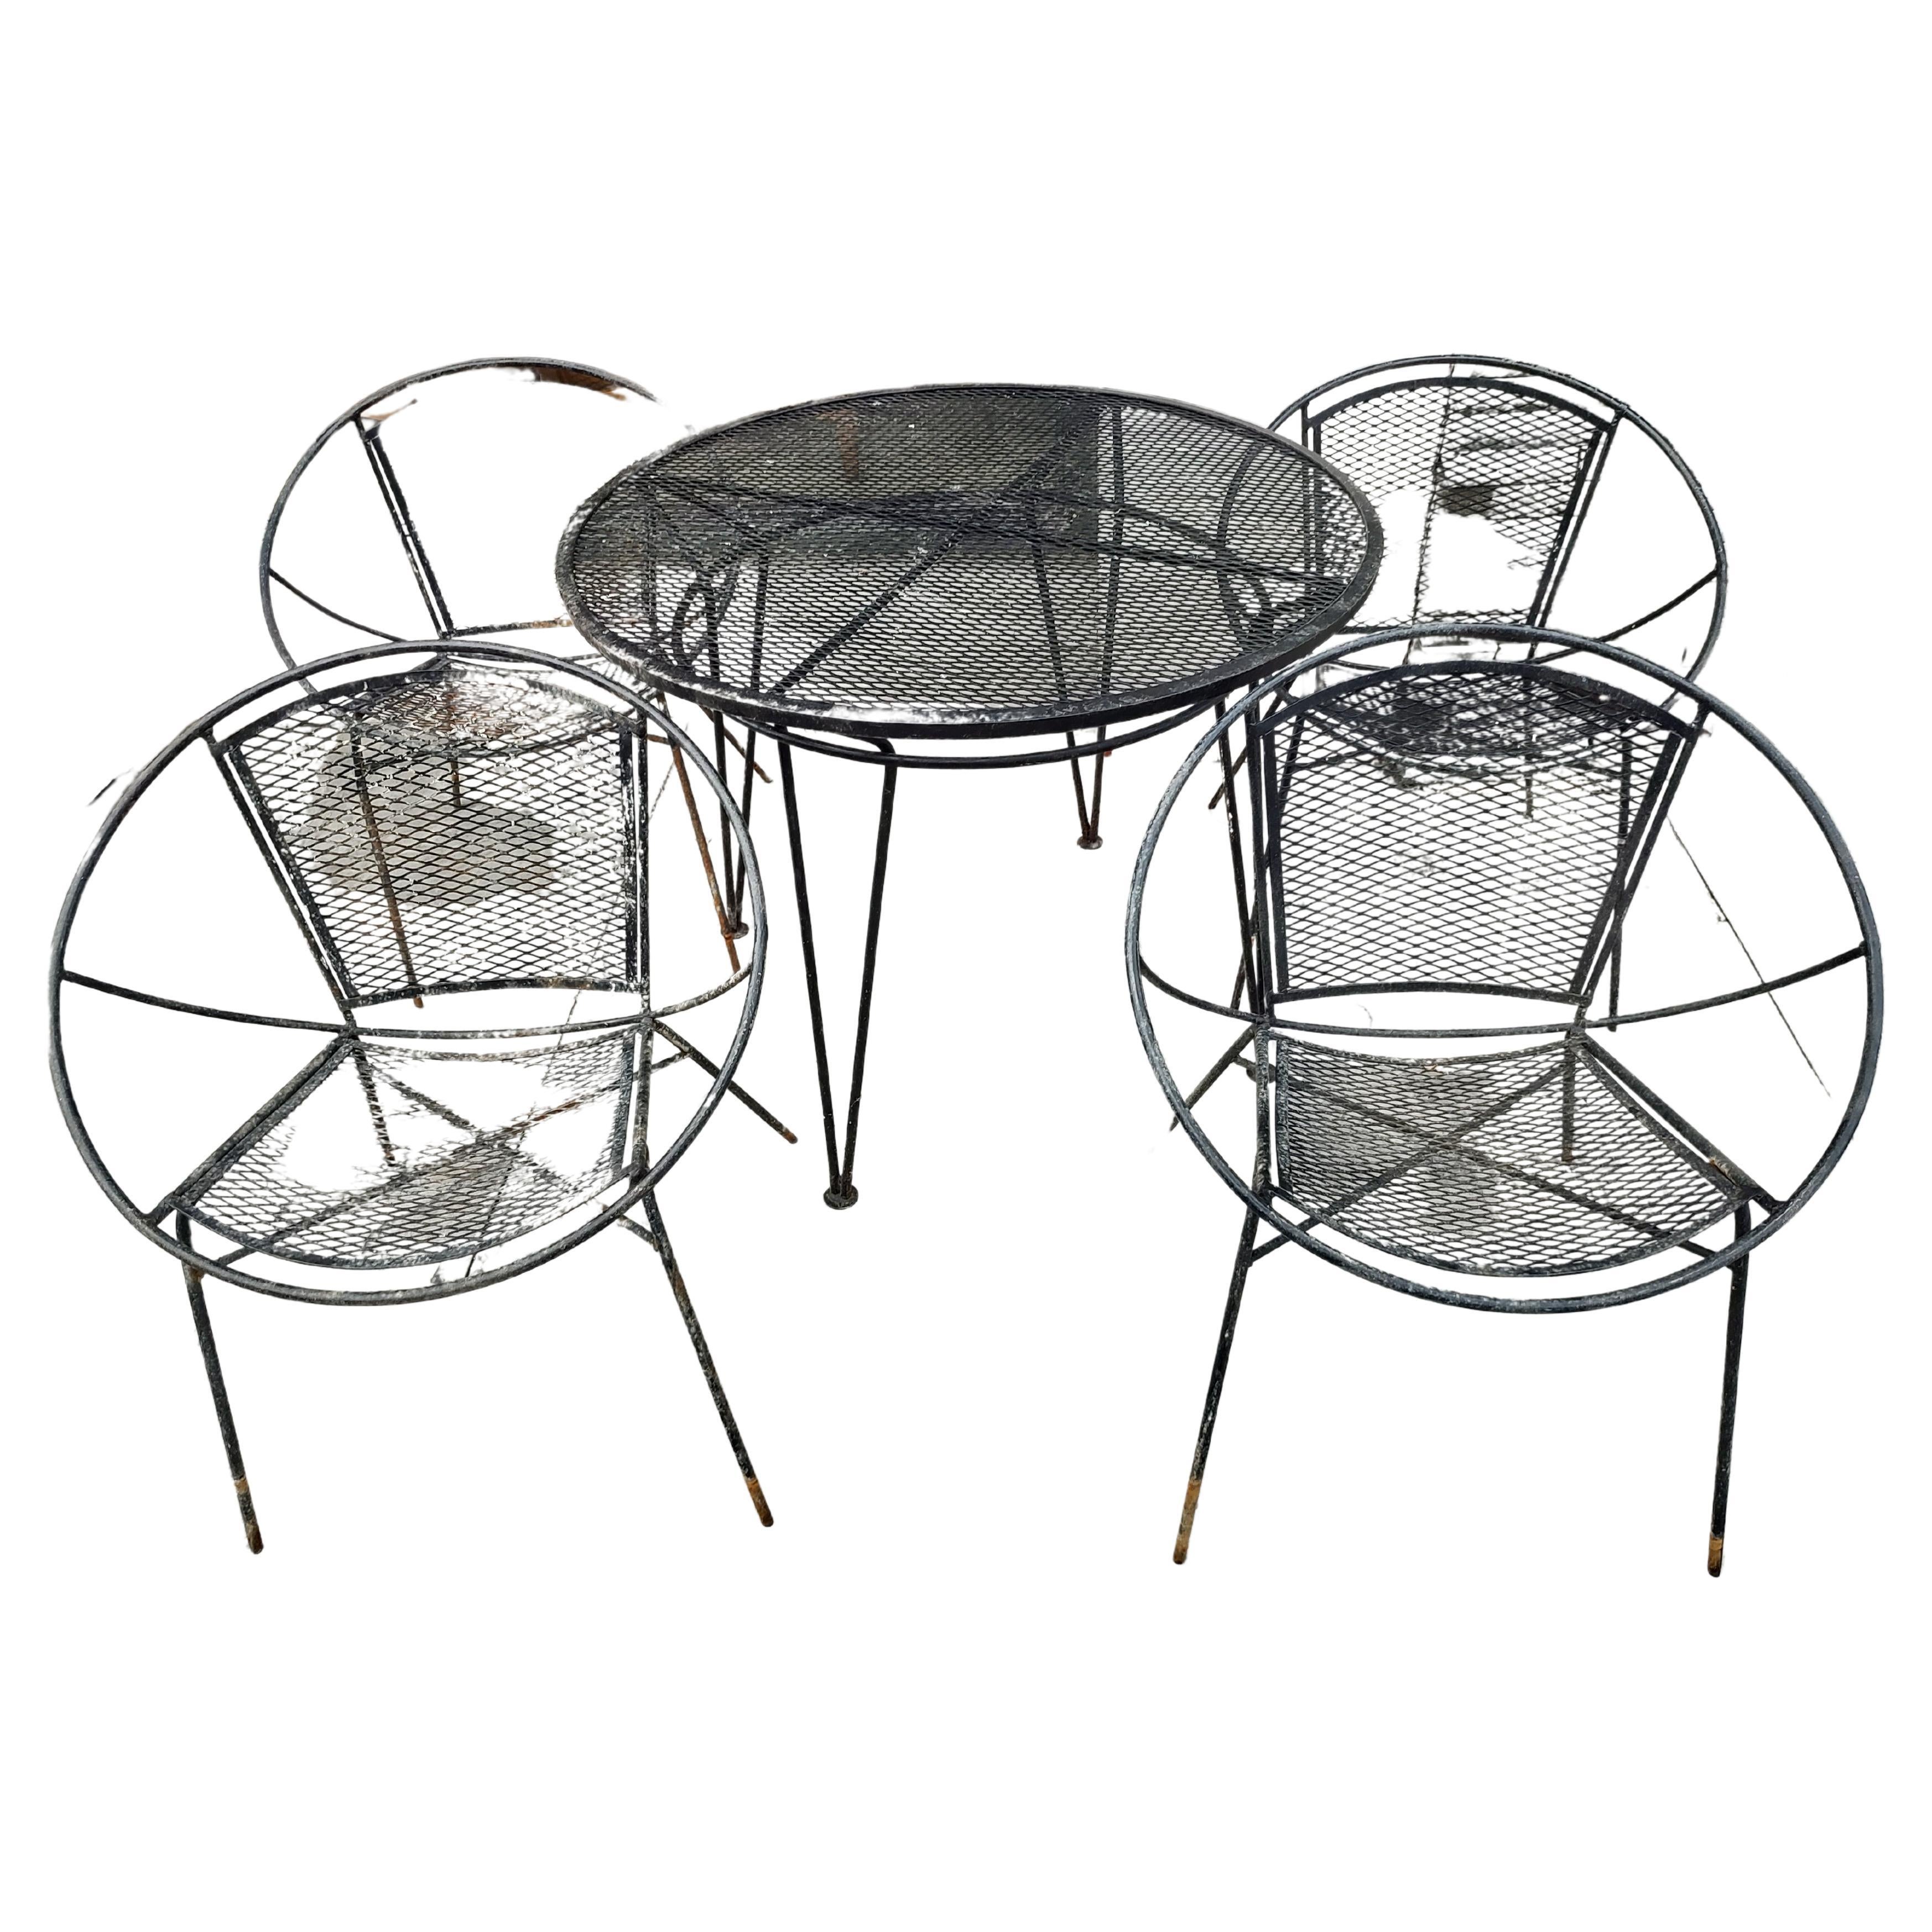 Hand-Crafted Mid-Century Modern 5pc Iron Hoop Chairs with Table by Maurizio Tempestini For Sale